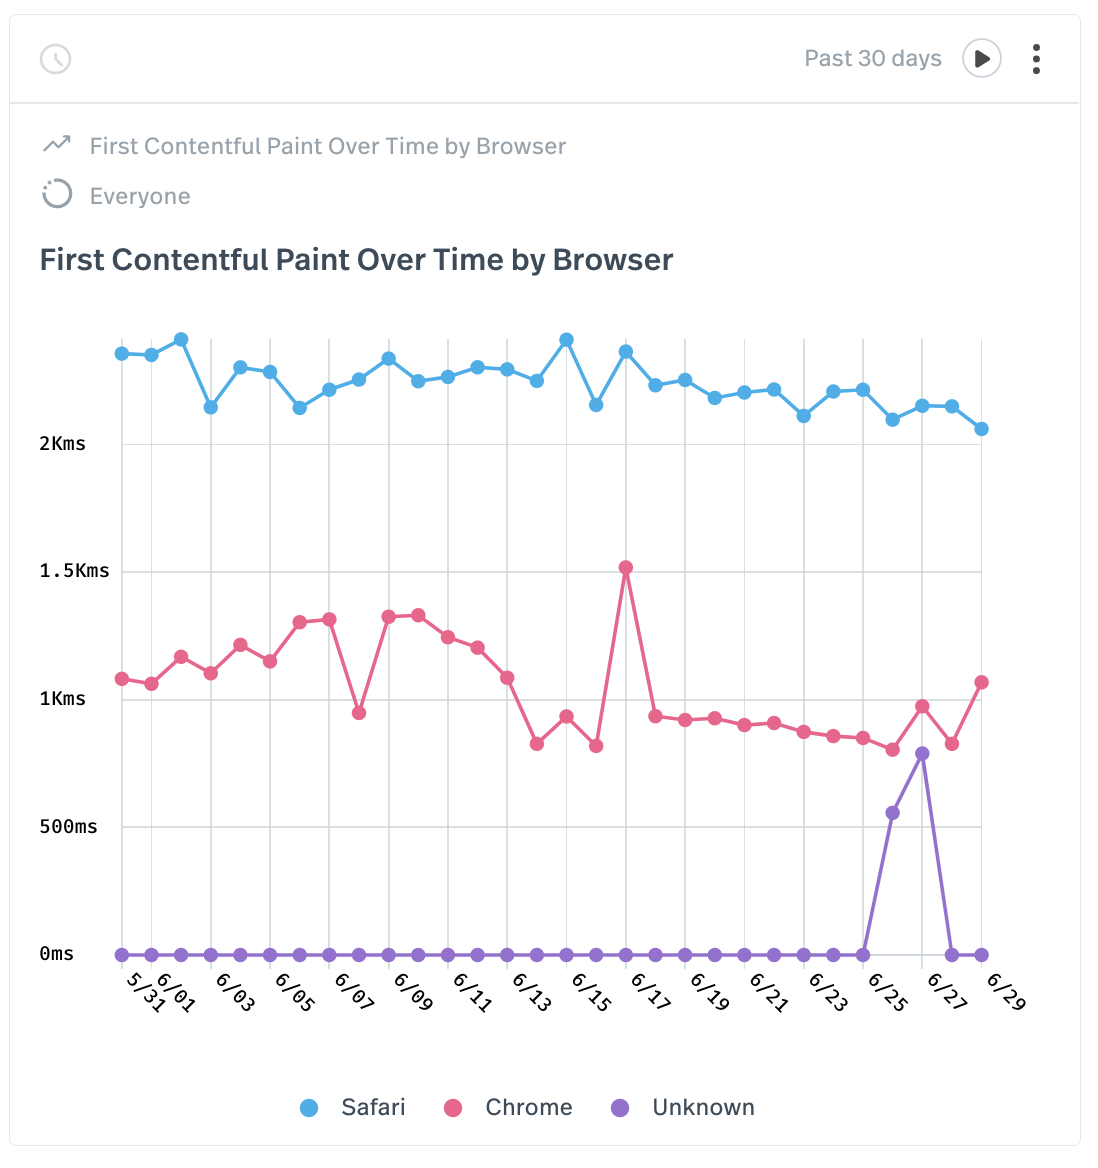 First Contentful Paint Over Time by Browser